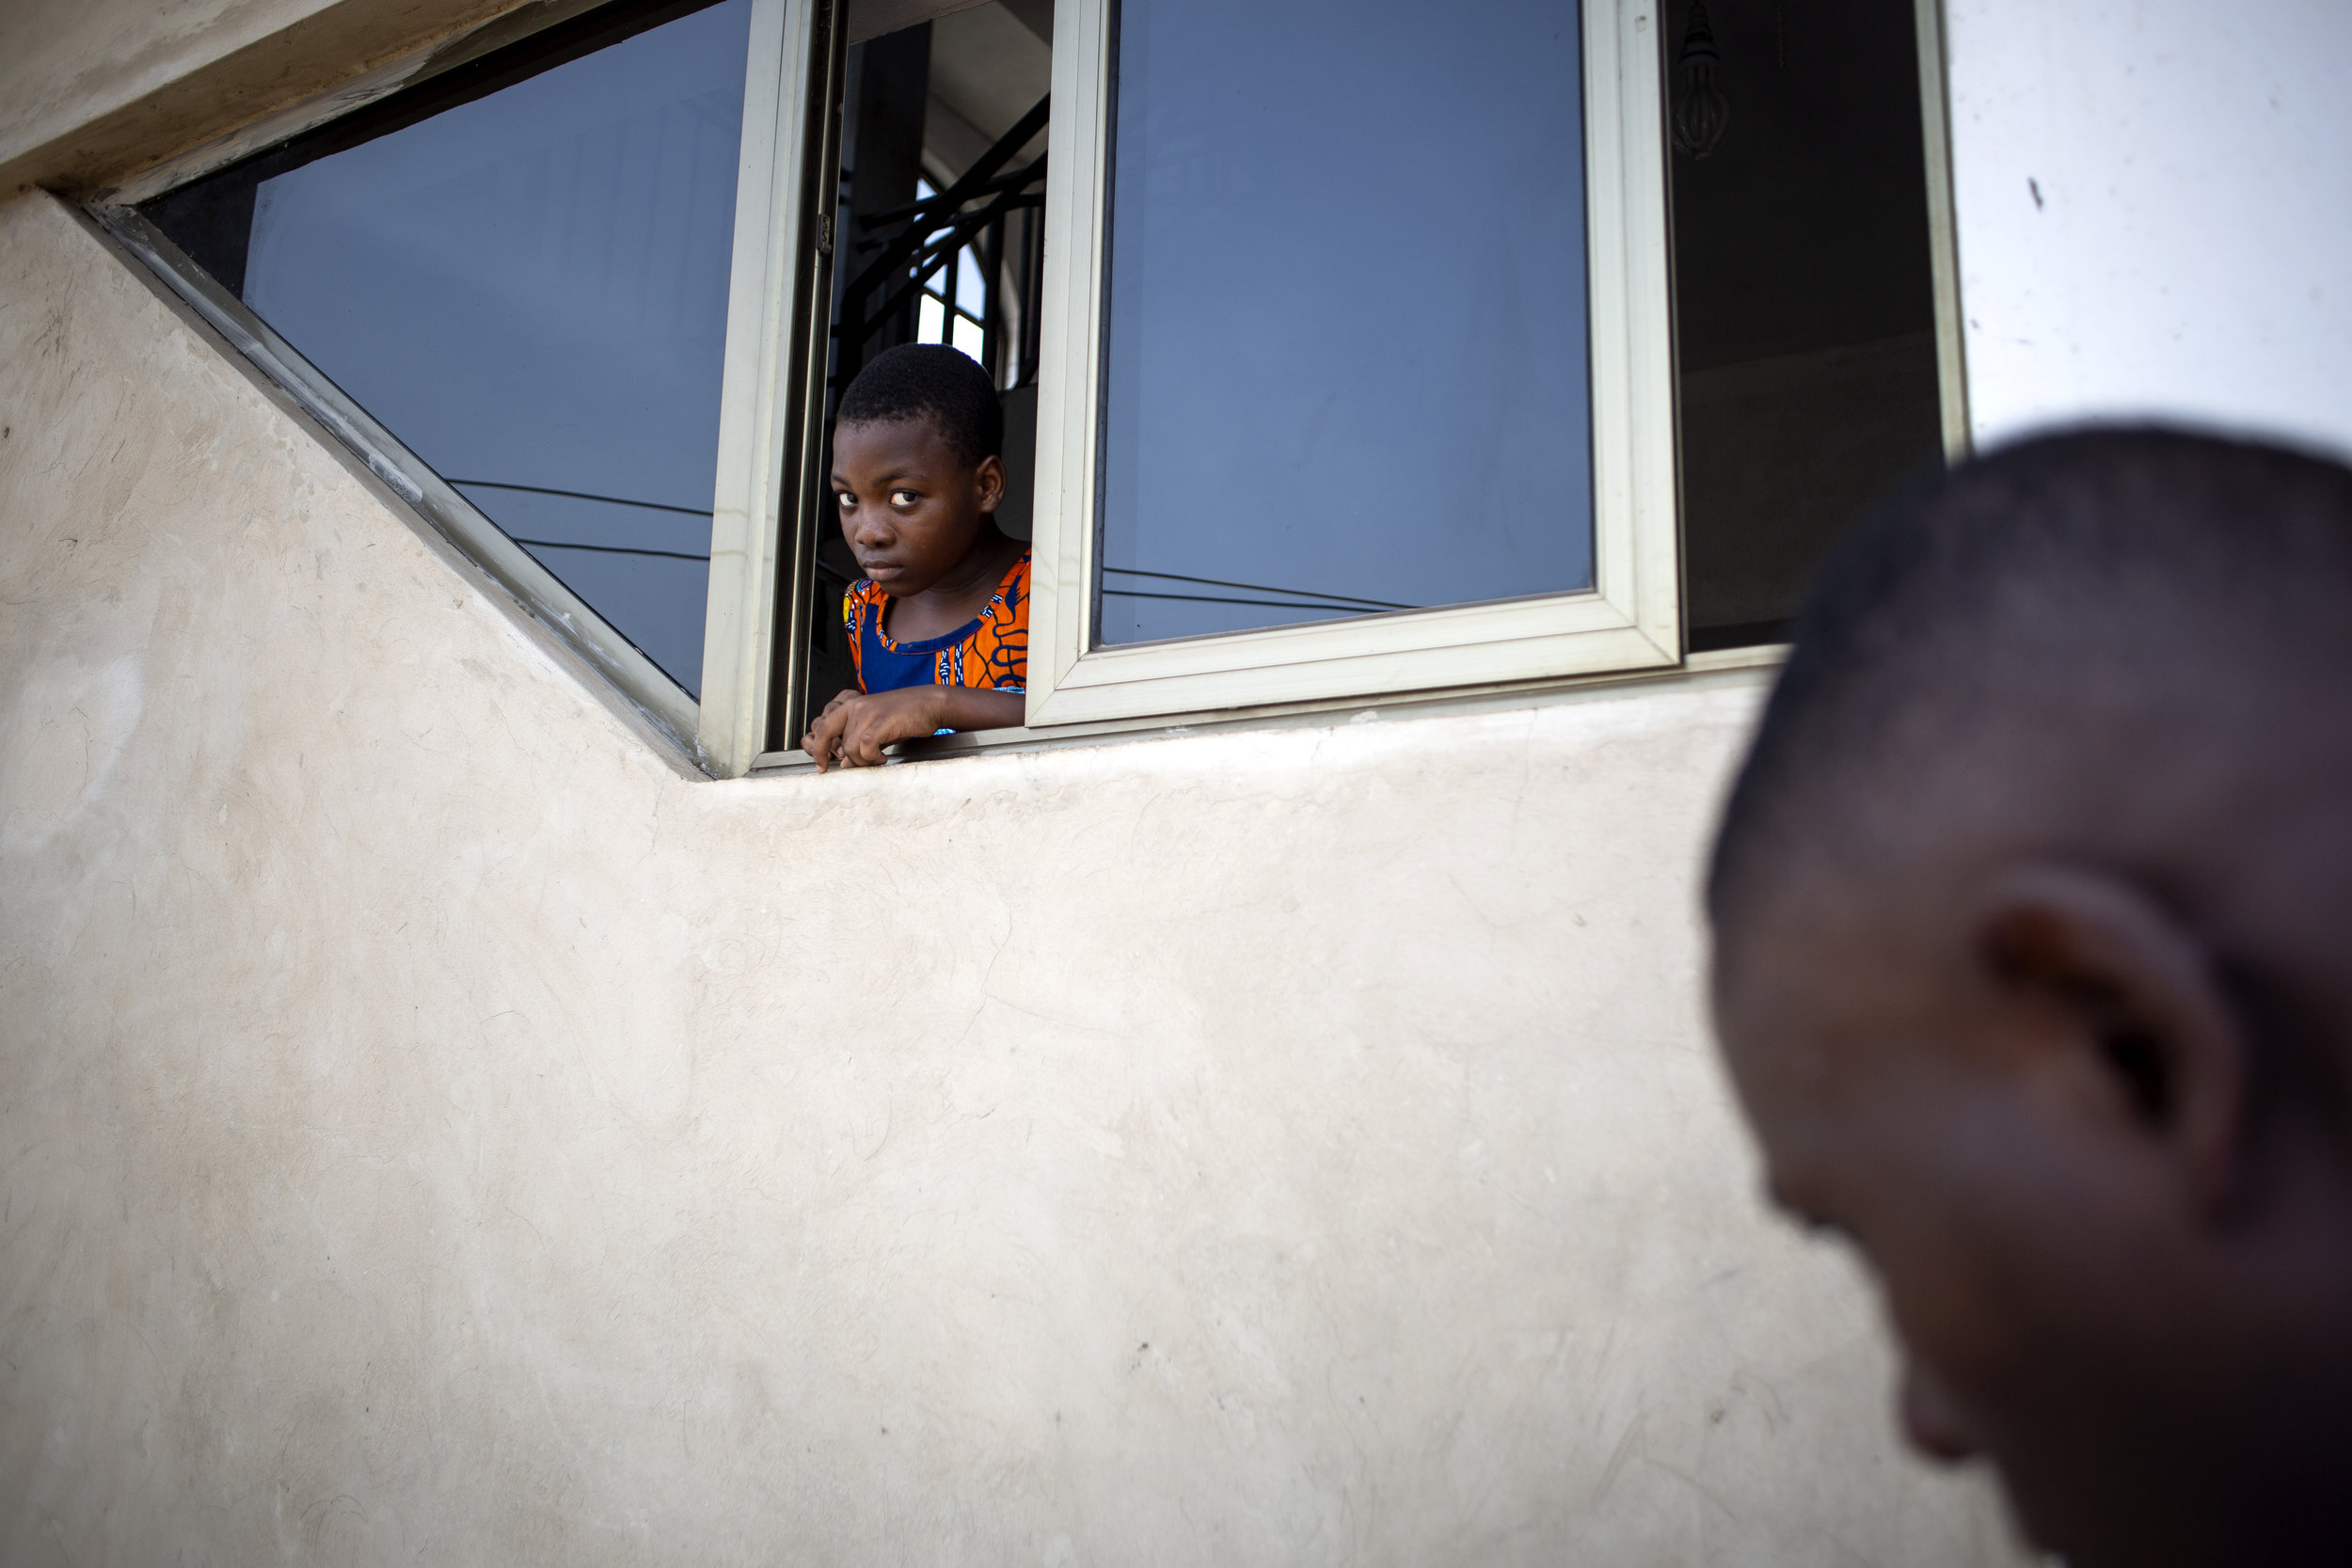  A young girl looks curiously out of a window during service at the S.D.A. Church in Maamobi, Ghana on March 25, 2017. 